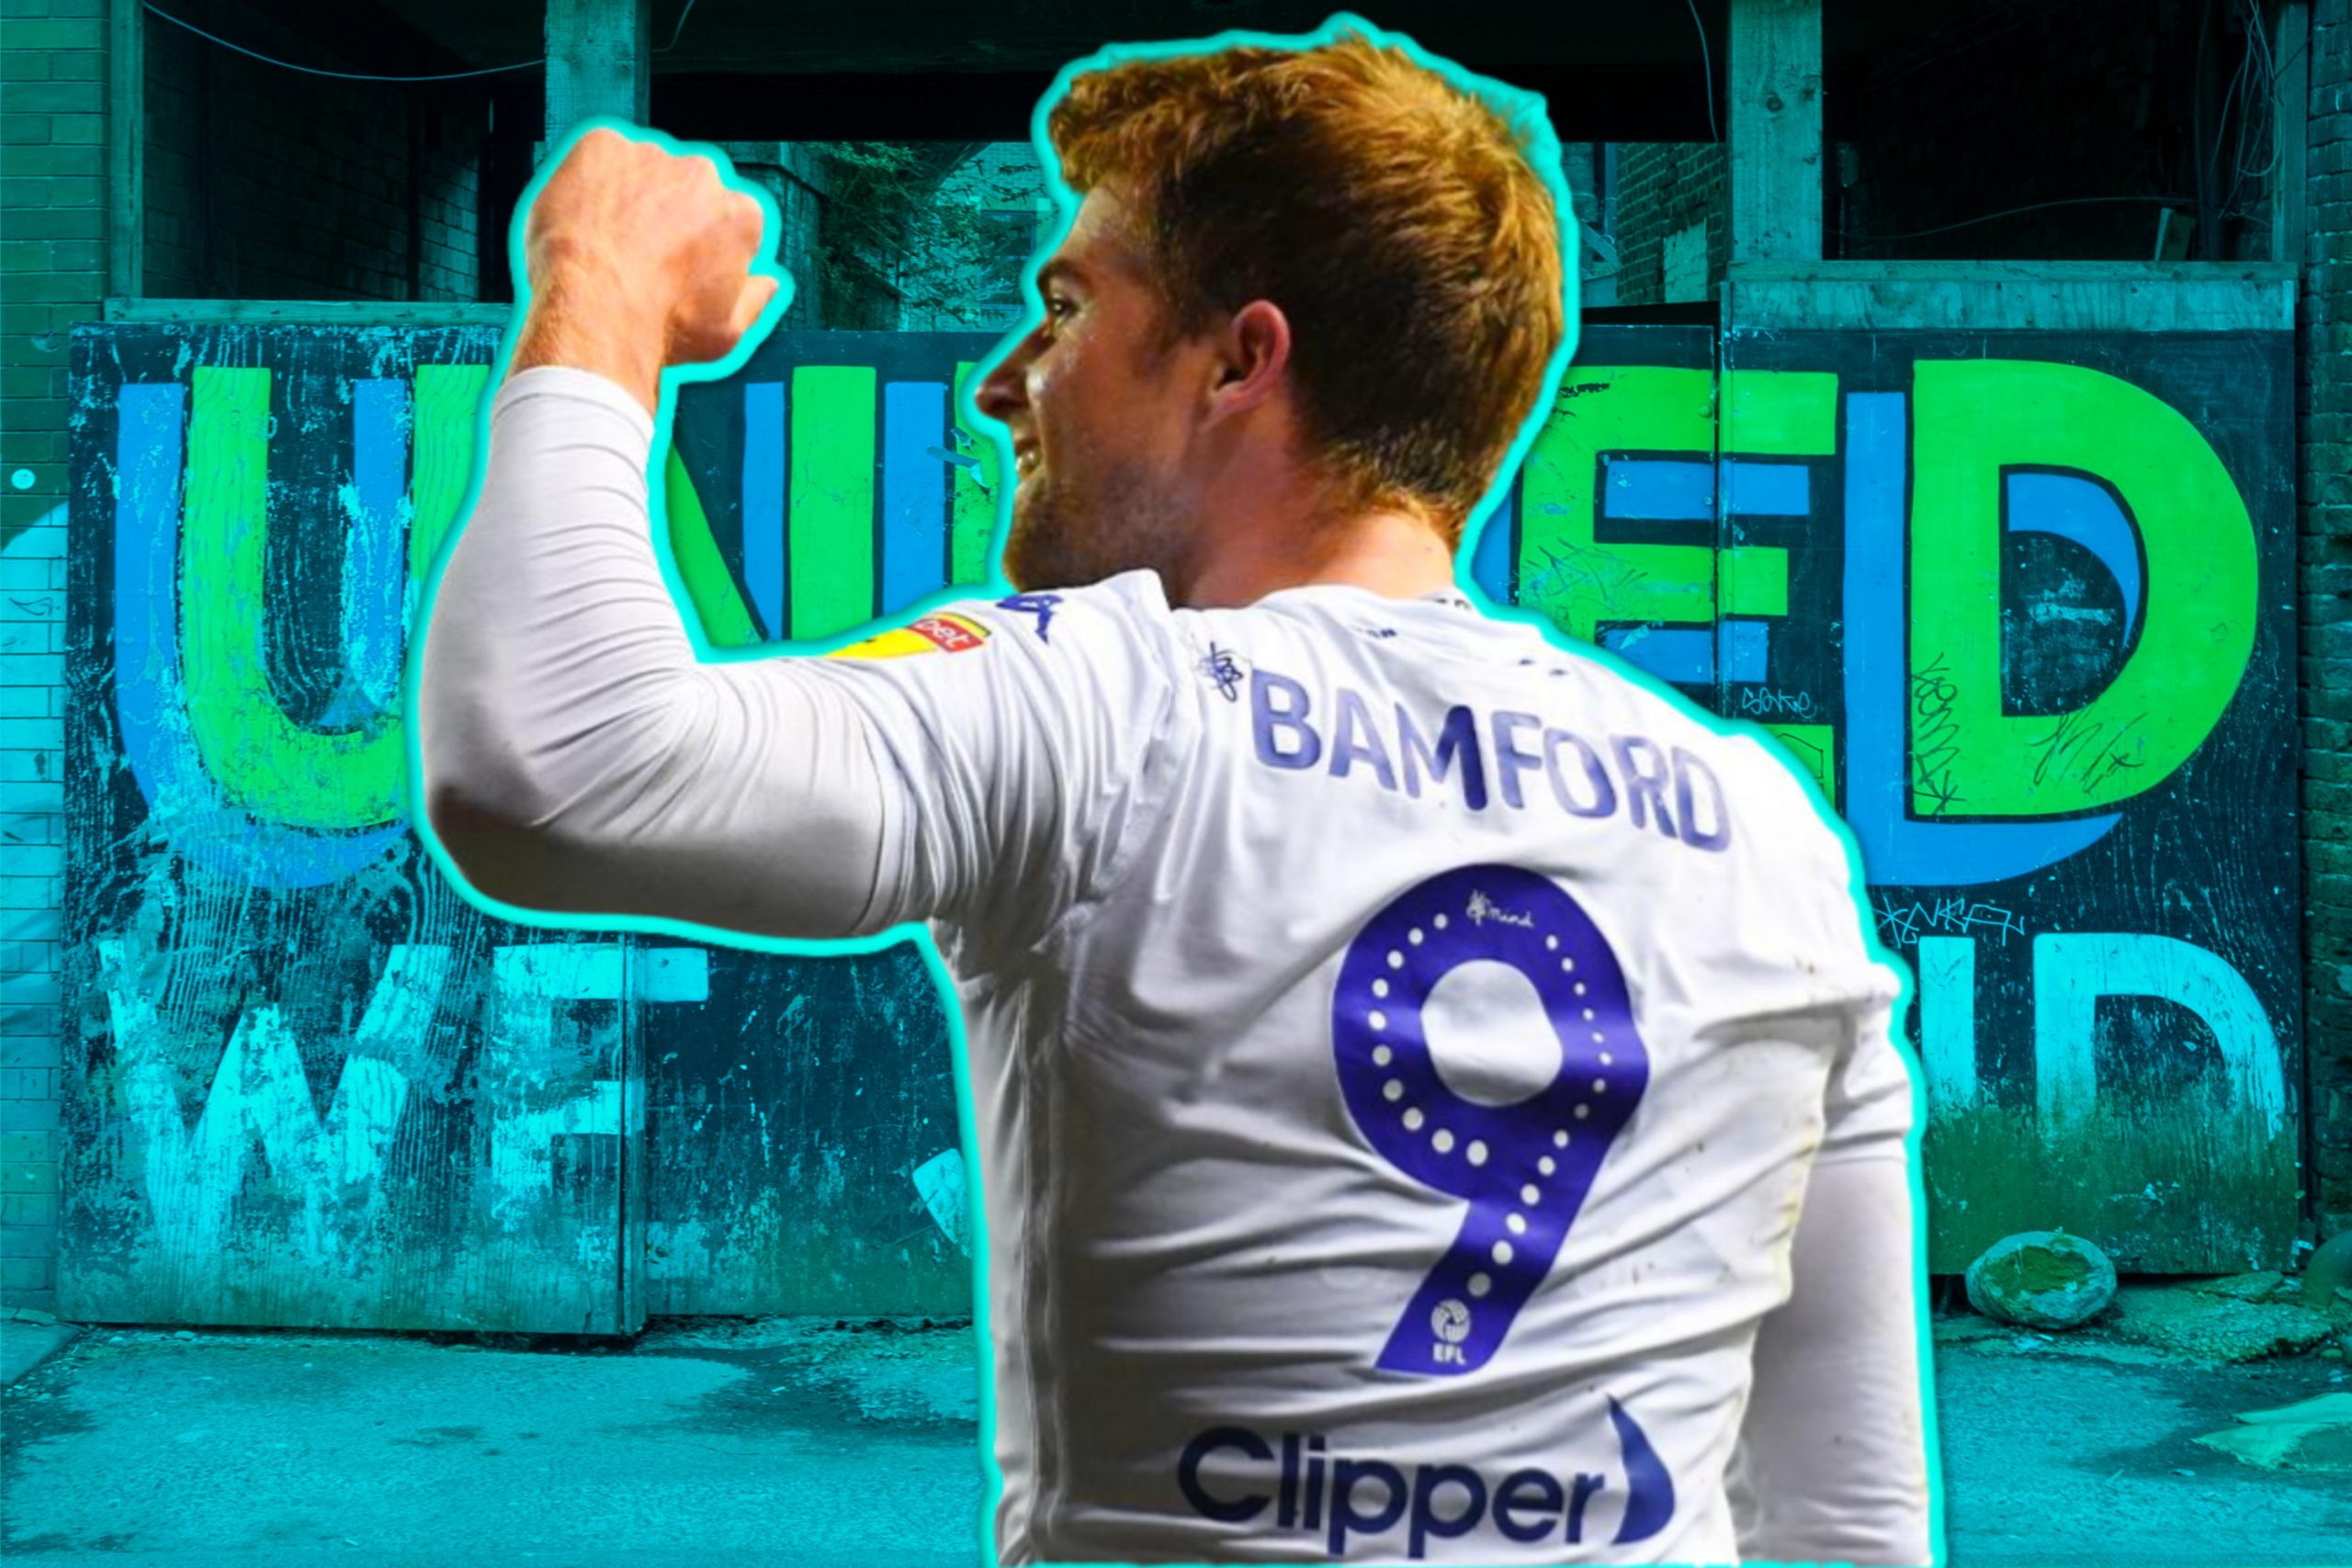 Leeds ace Patrick Bamford joins Hector Bellerin in speaking out against racism in America